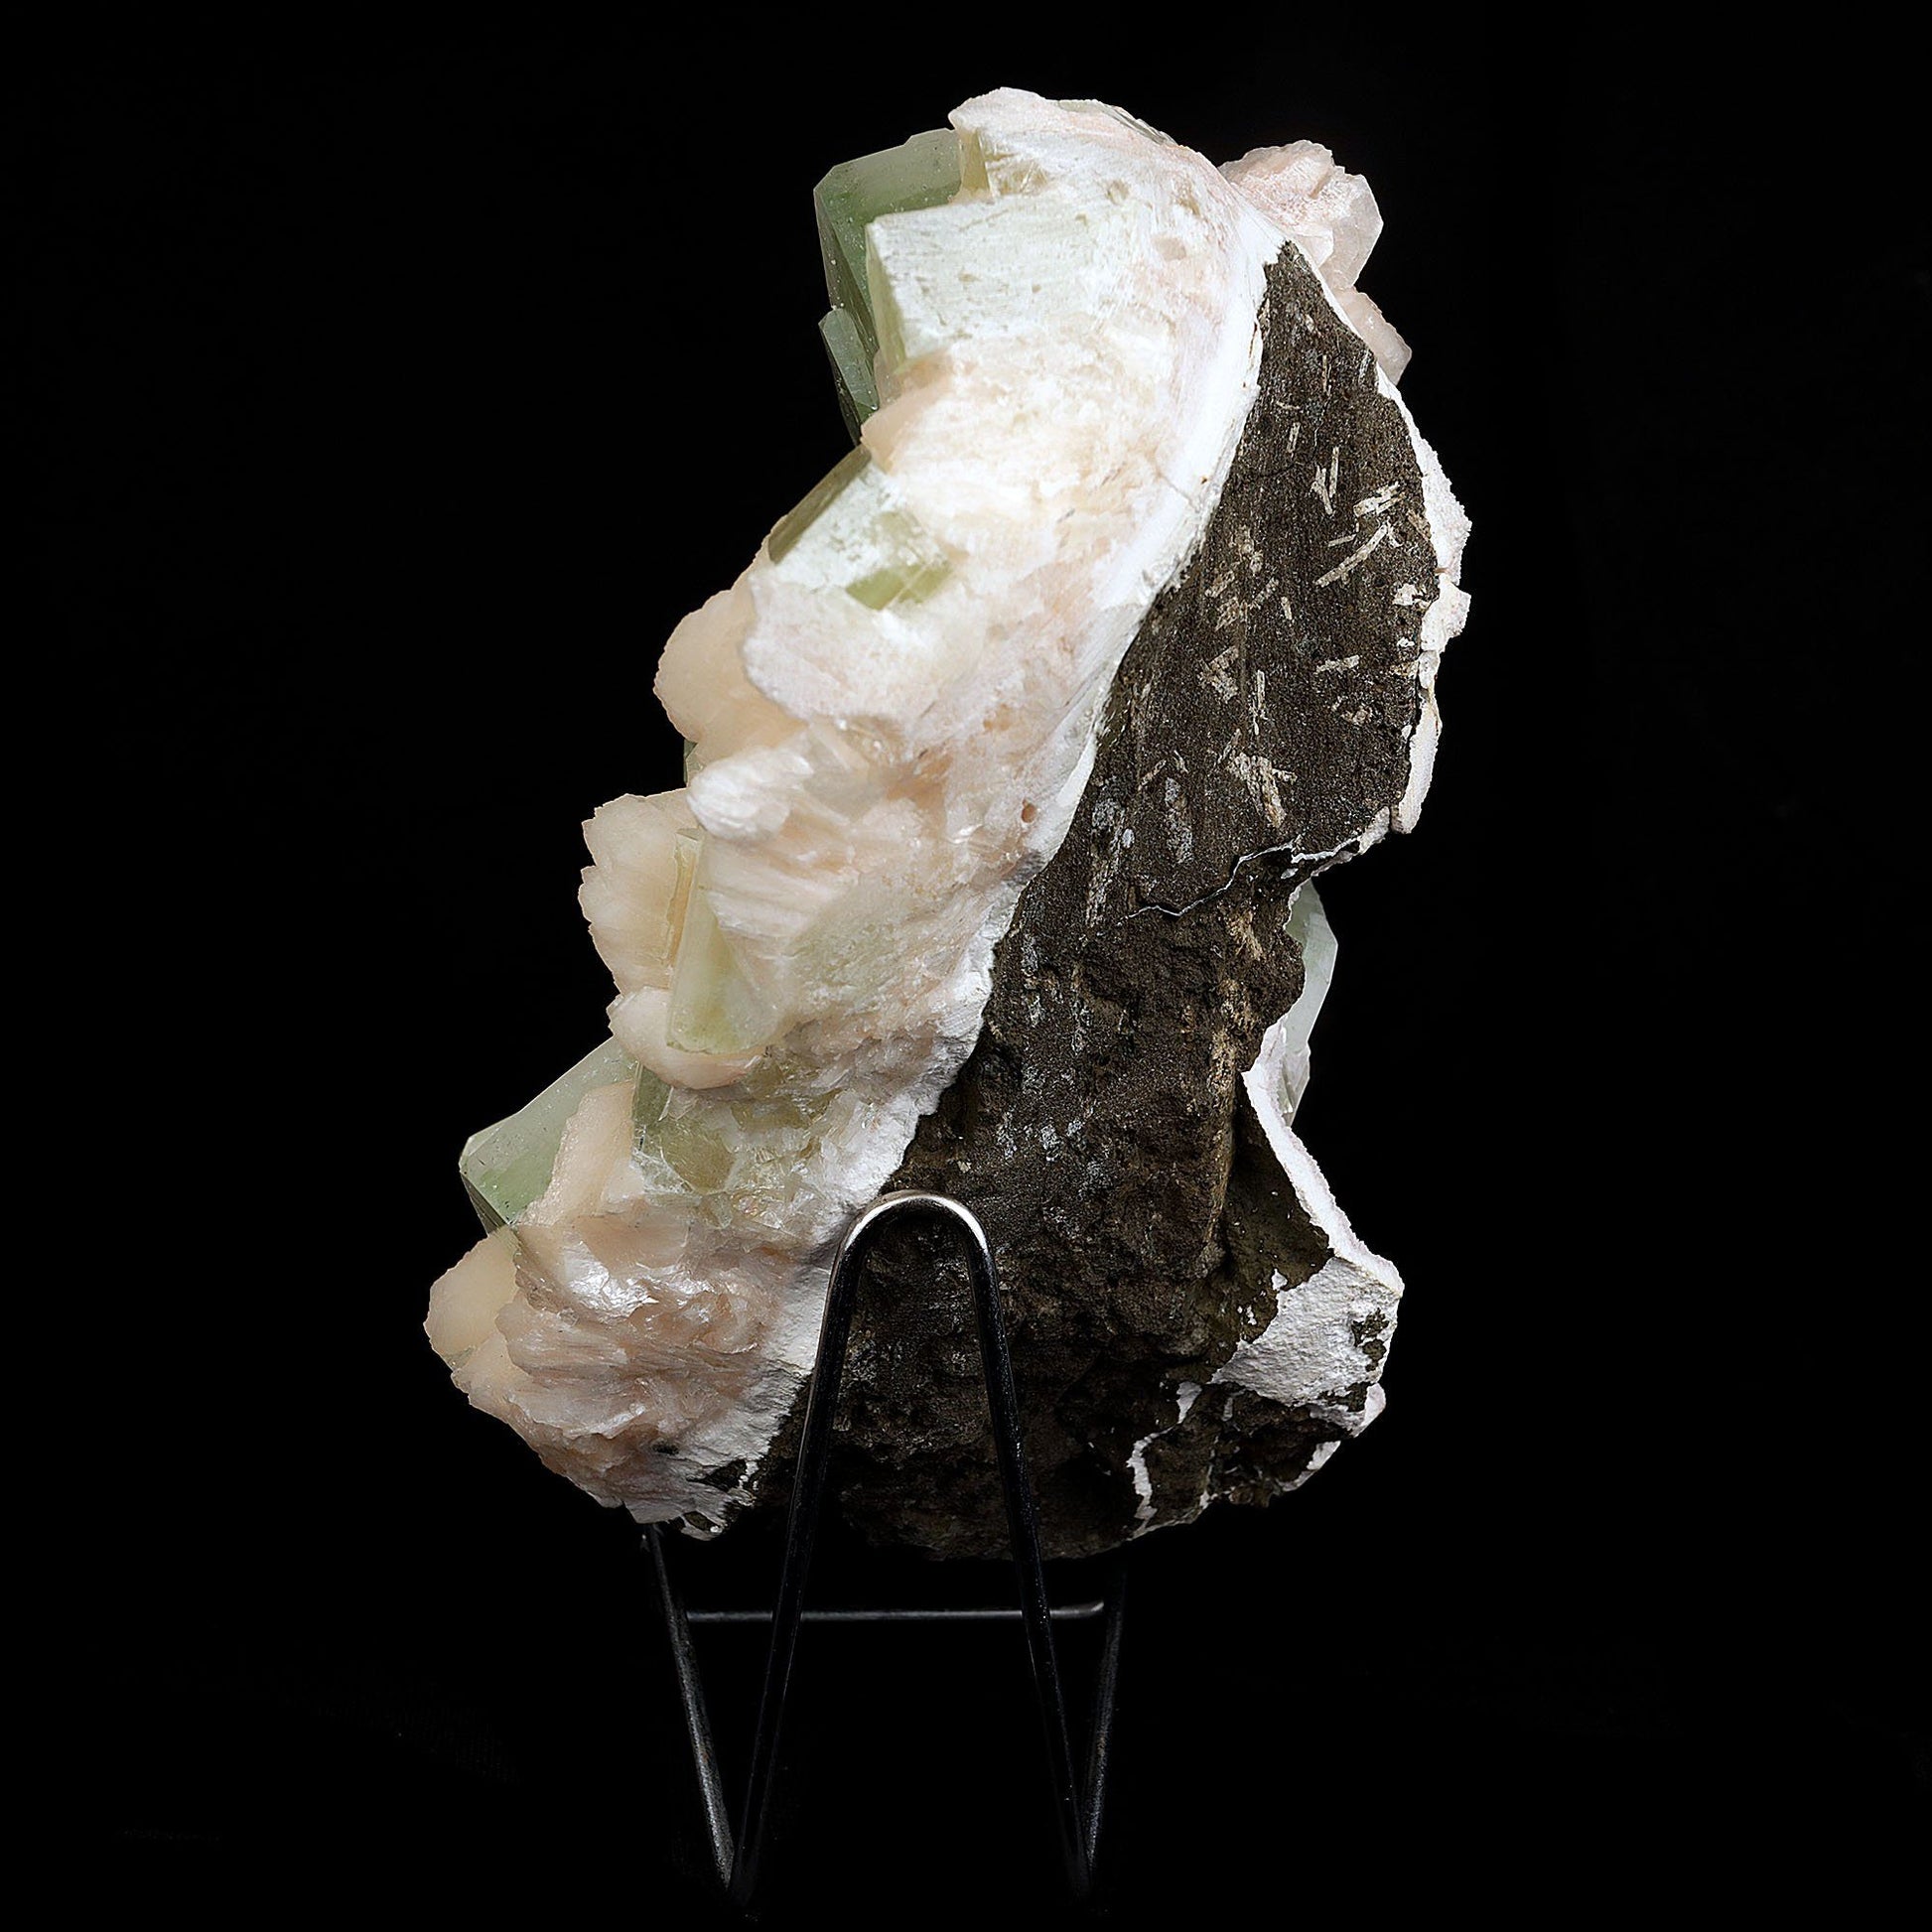 Apophyllite Green Cubes with Stilbite Natural Mineral Specimen # B 371…  https://www.superbminerals.us/products/apophyllite-green-cubes-with-stilbite-natural-mineral-specimen-b-3718  Features:A very aesthetic piece featuring a matrix densely coated with miniature, beige Stilbite crystals with a cluster of lustrous, larger light-beige Stilbite crystals at the base, all hosting a crown of transparent, mint-green Apophyllite pseudocubic (rectangular) crystals. Great contrast, color, symmetry and luste